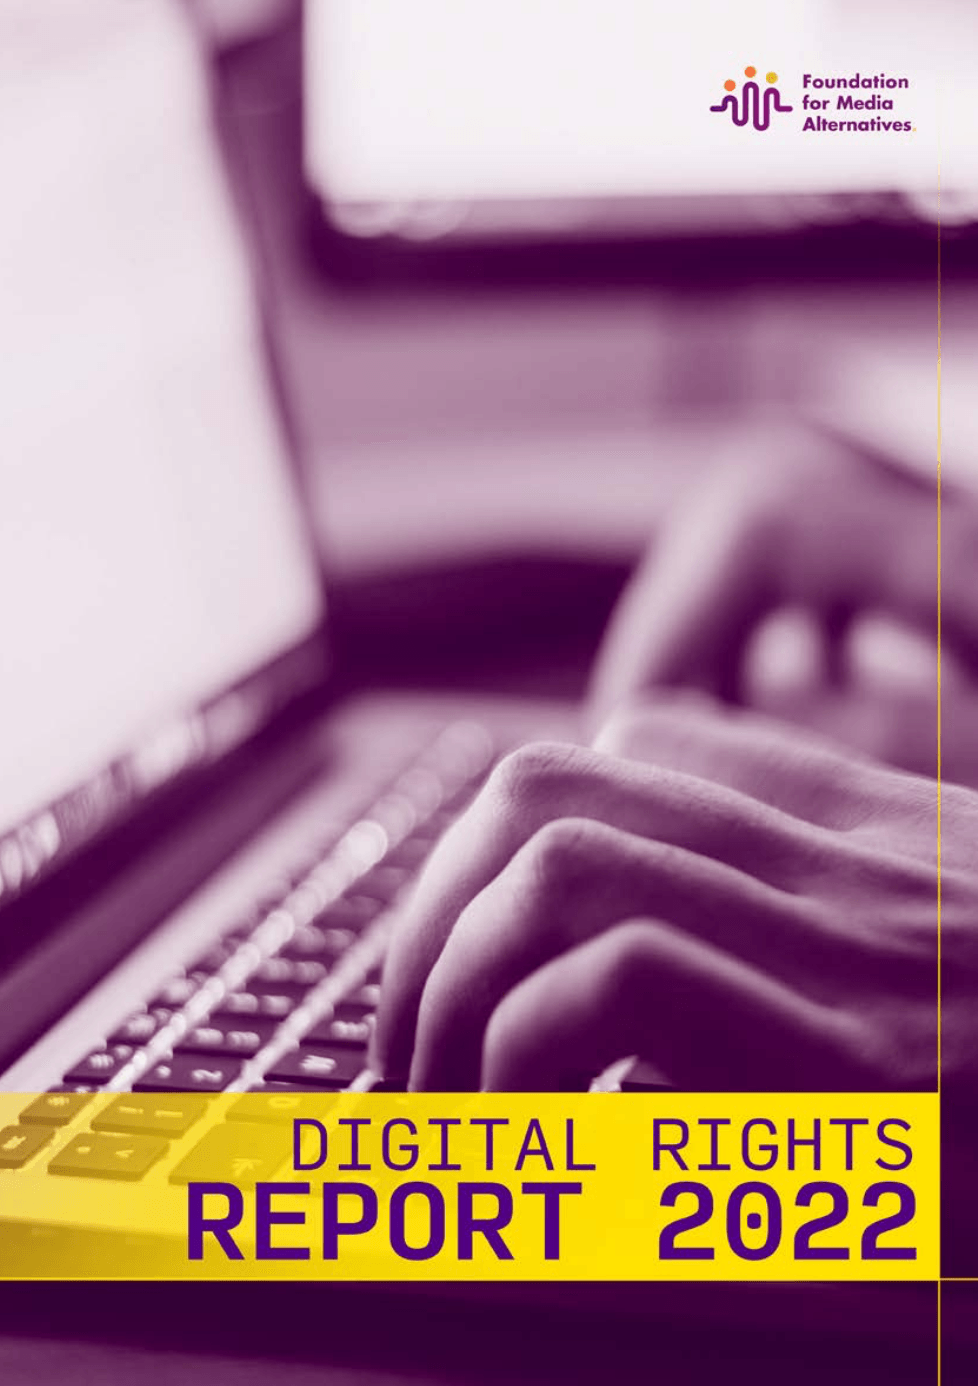 FMA releases the Digital Rights Report 2022